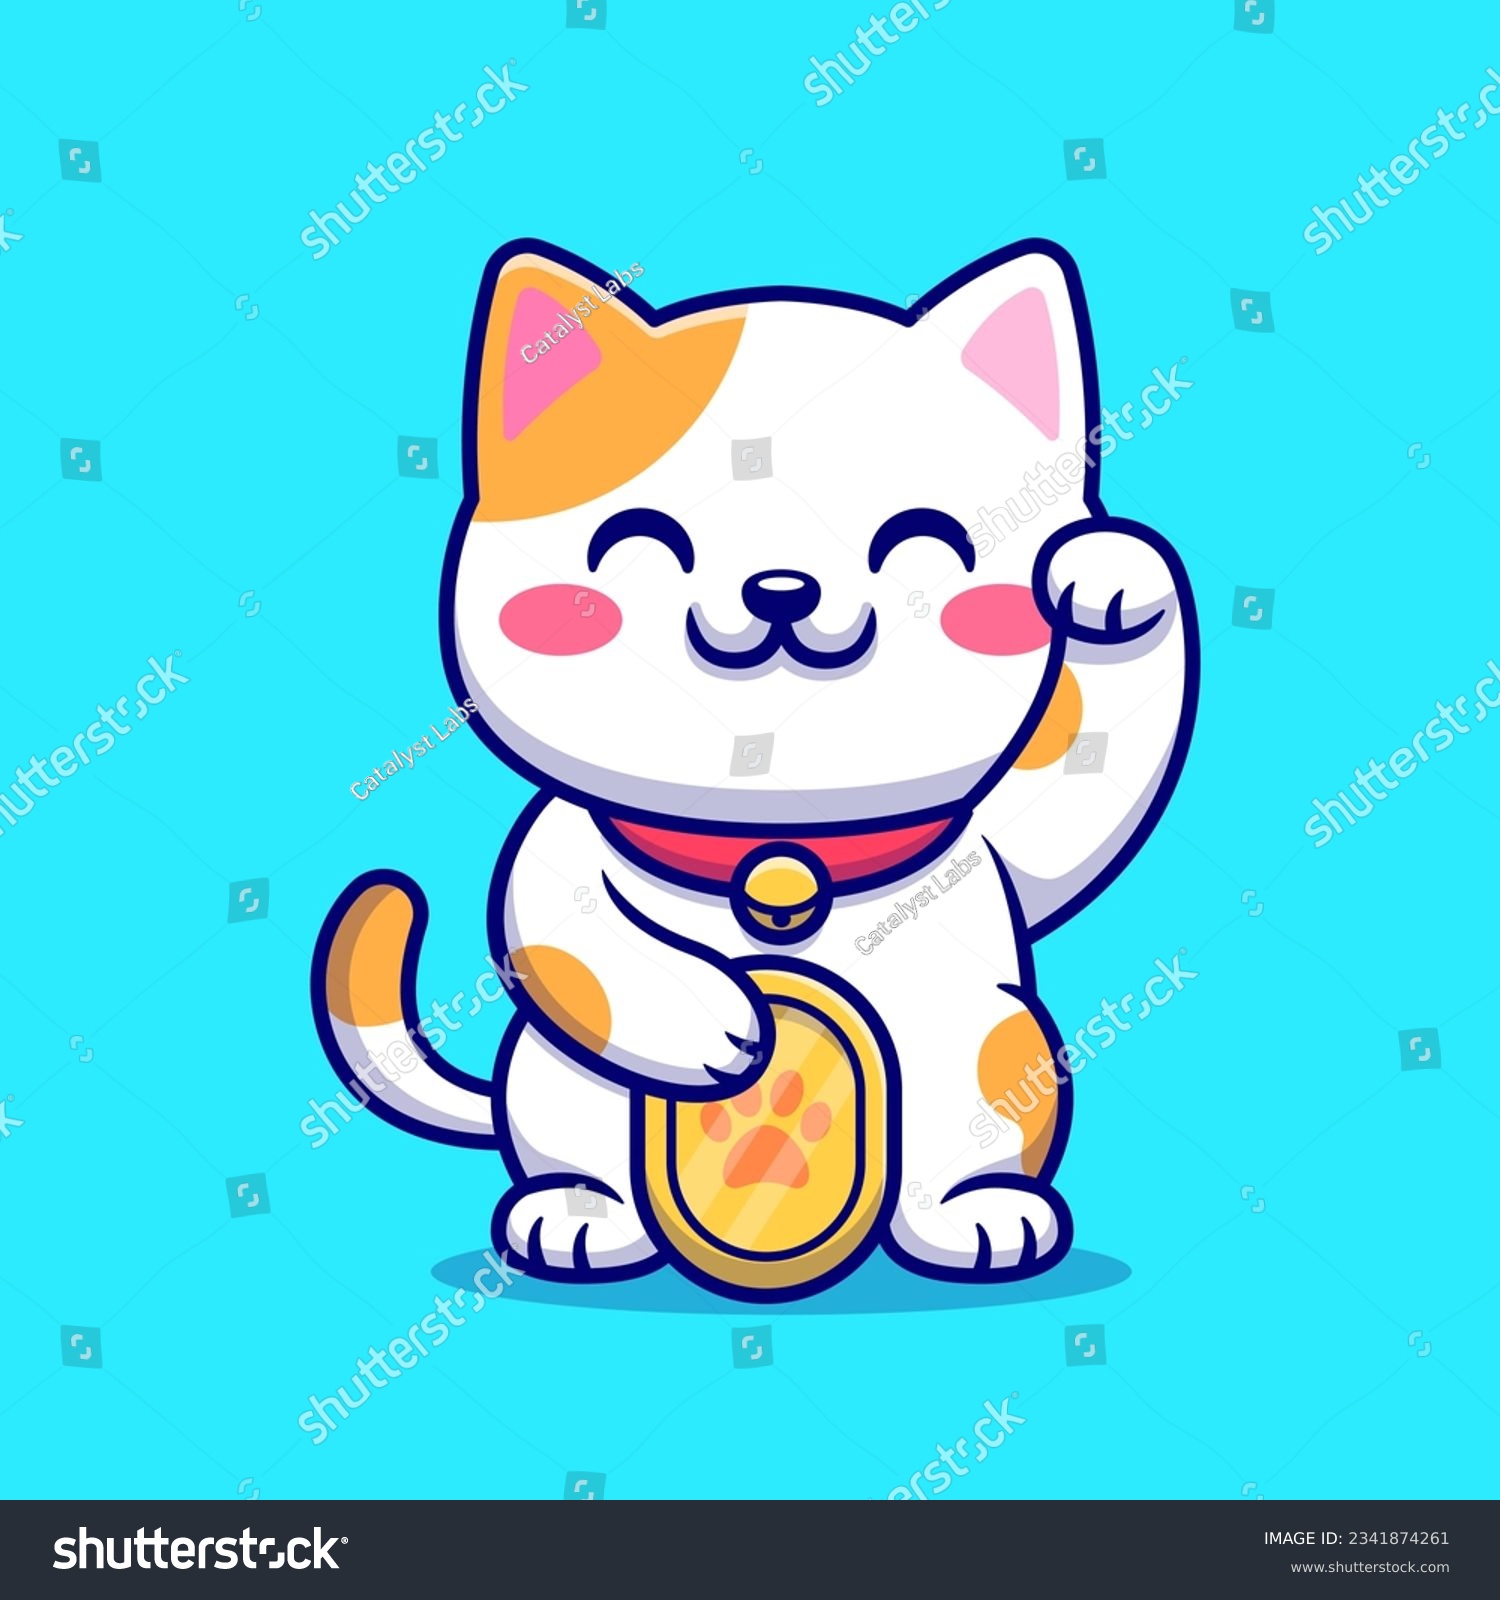 SVG of Cute Lucky Cat With Gold Coin Cartoon Vector Icon Illustration. Animal Finance Icon Concept Isolated Premium Vector. Flat Cartoon Style svg